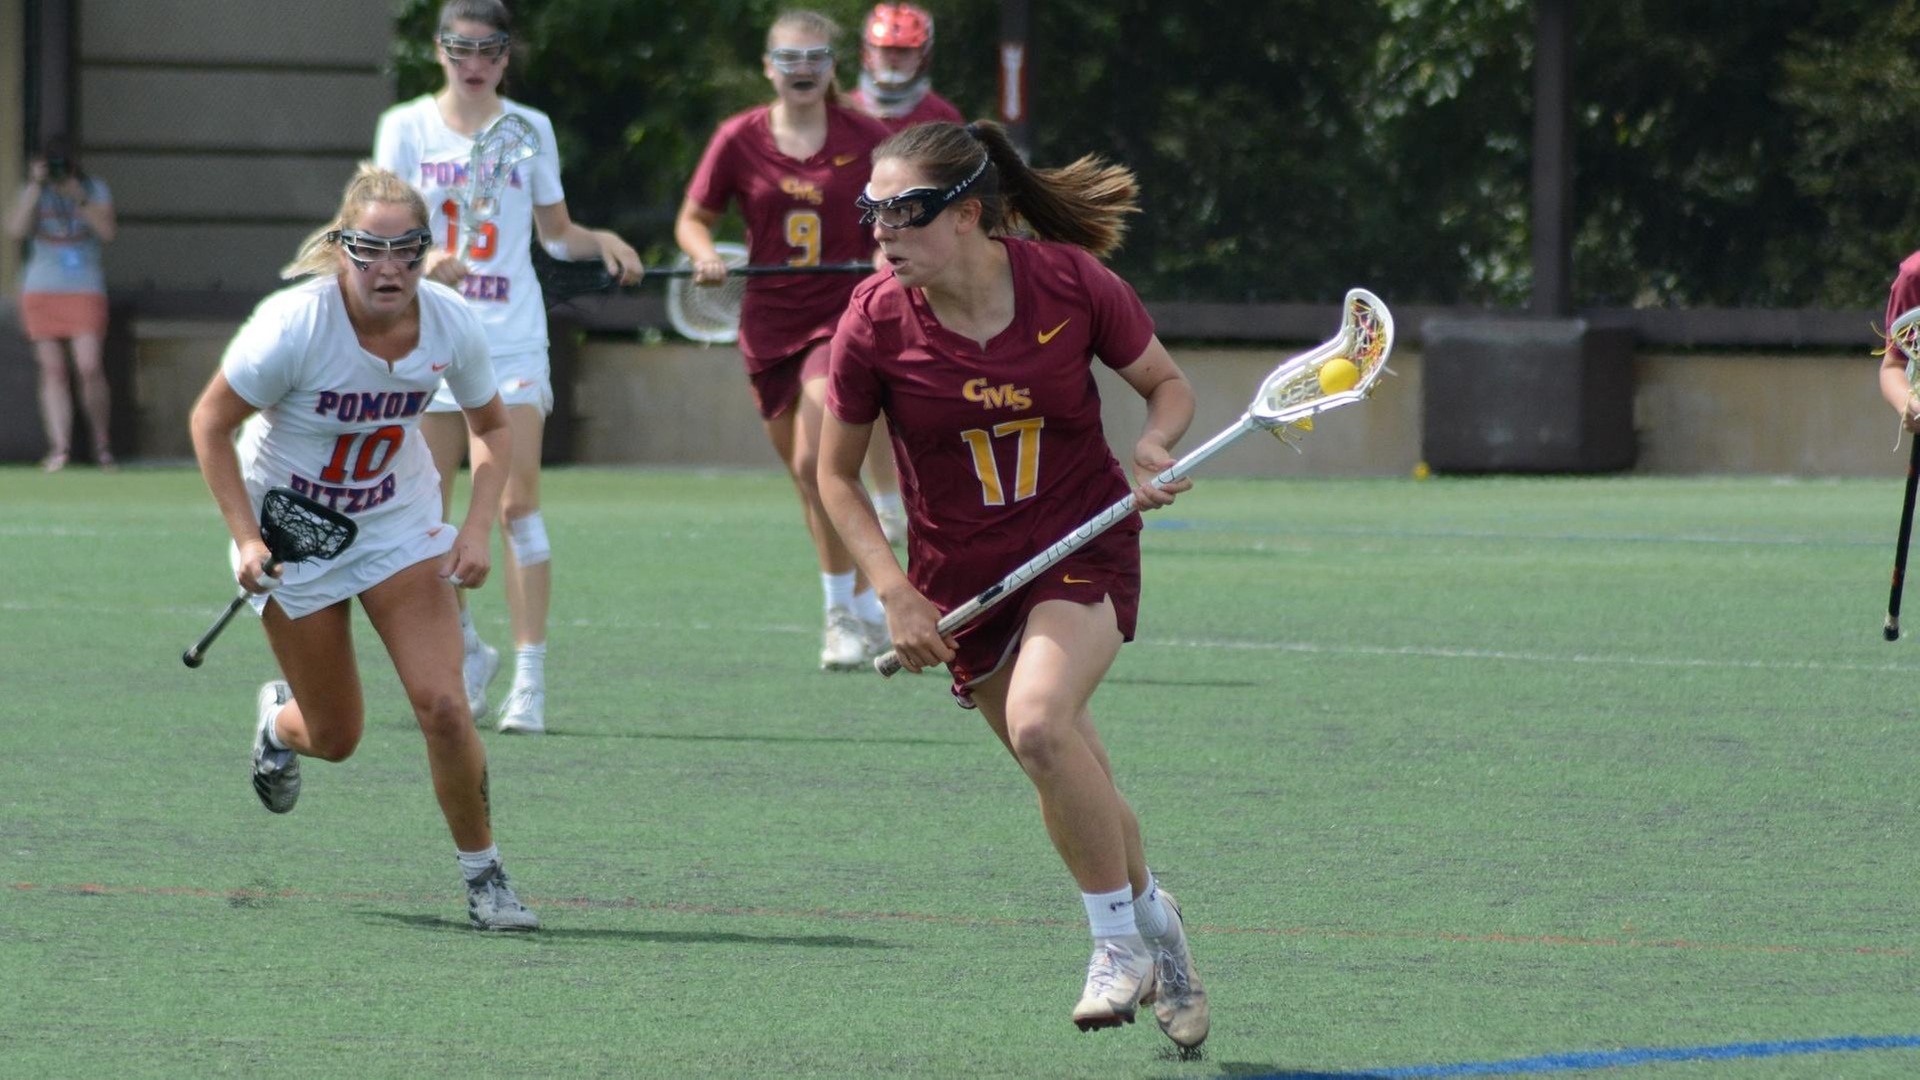 Emme McMullen had five goals to lead the Athenas